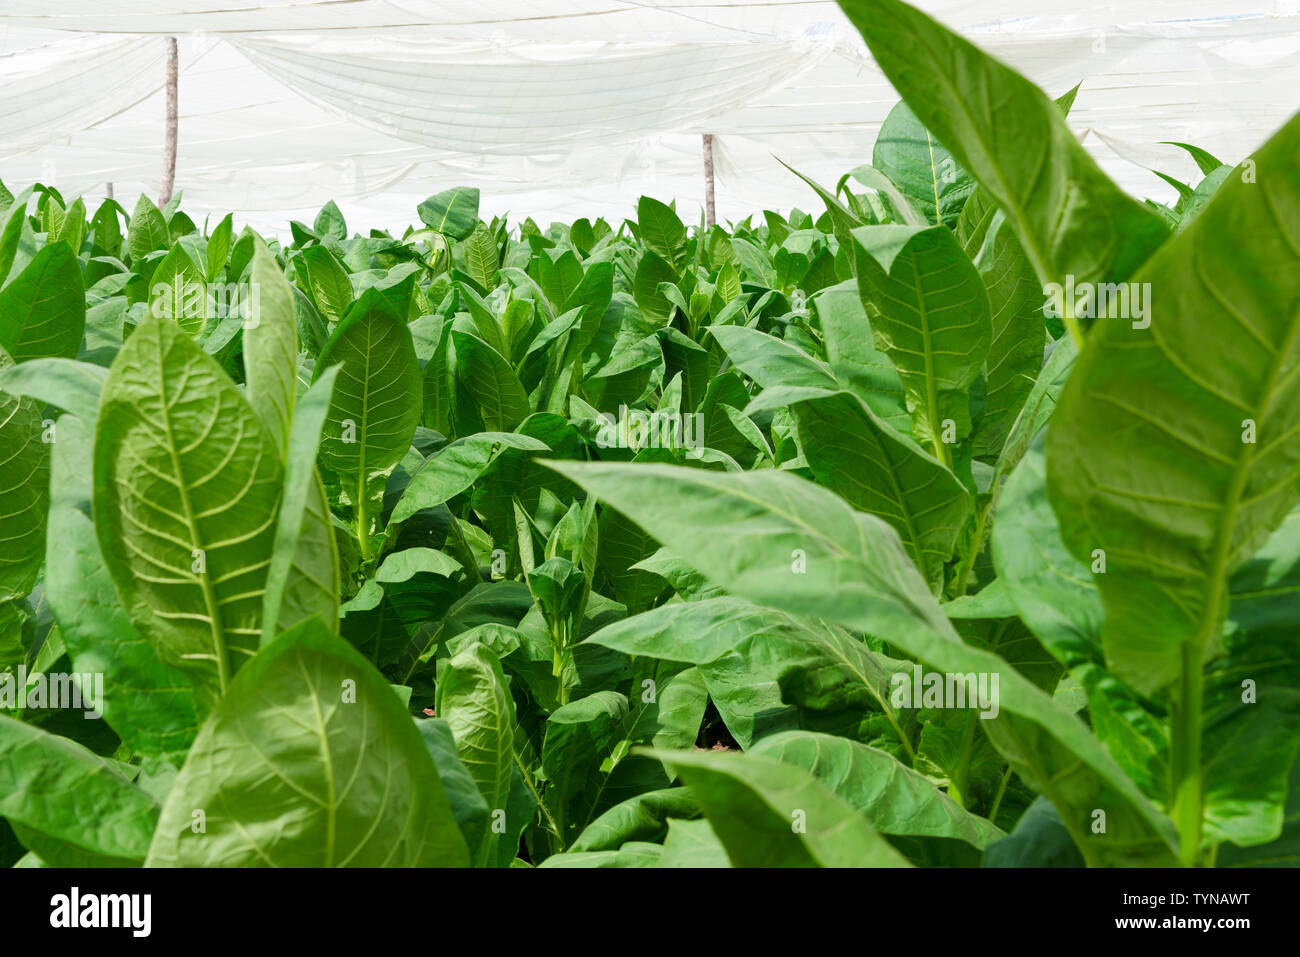 Tobacco leaves growing under cover (Corojo) on farm in the countryside surrounding the village of San Juan y Martinez, Pinar del Rio Province, Cuba Stock Photo